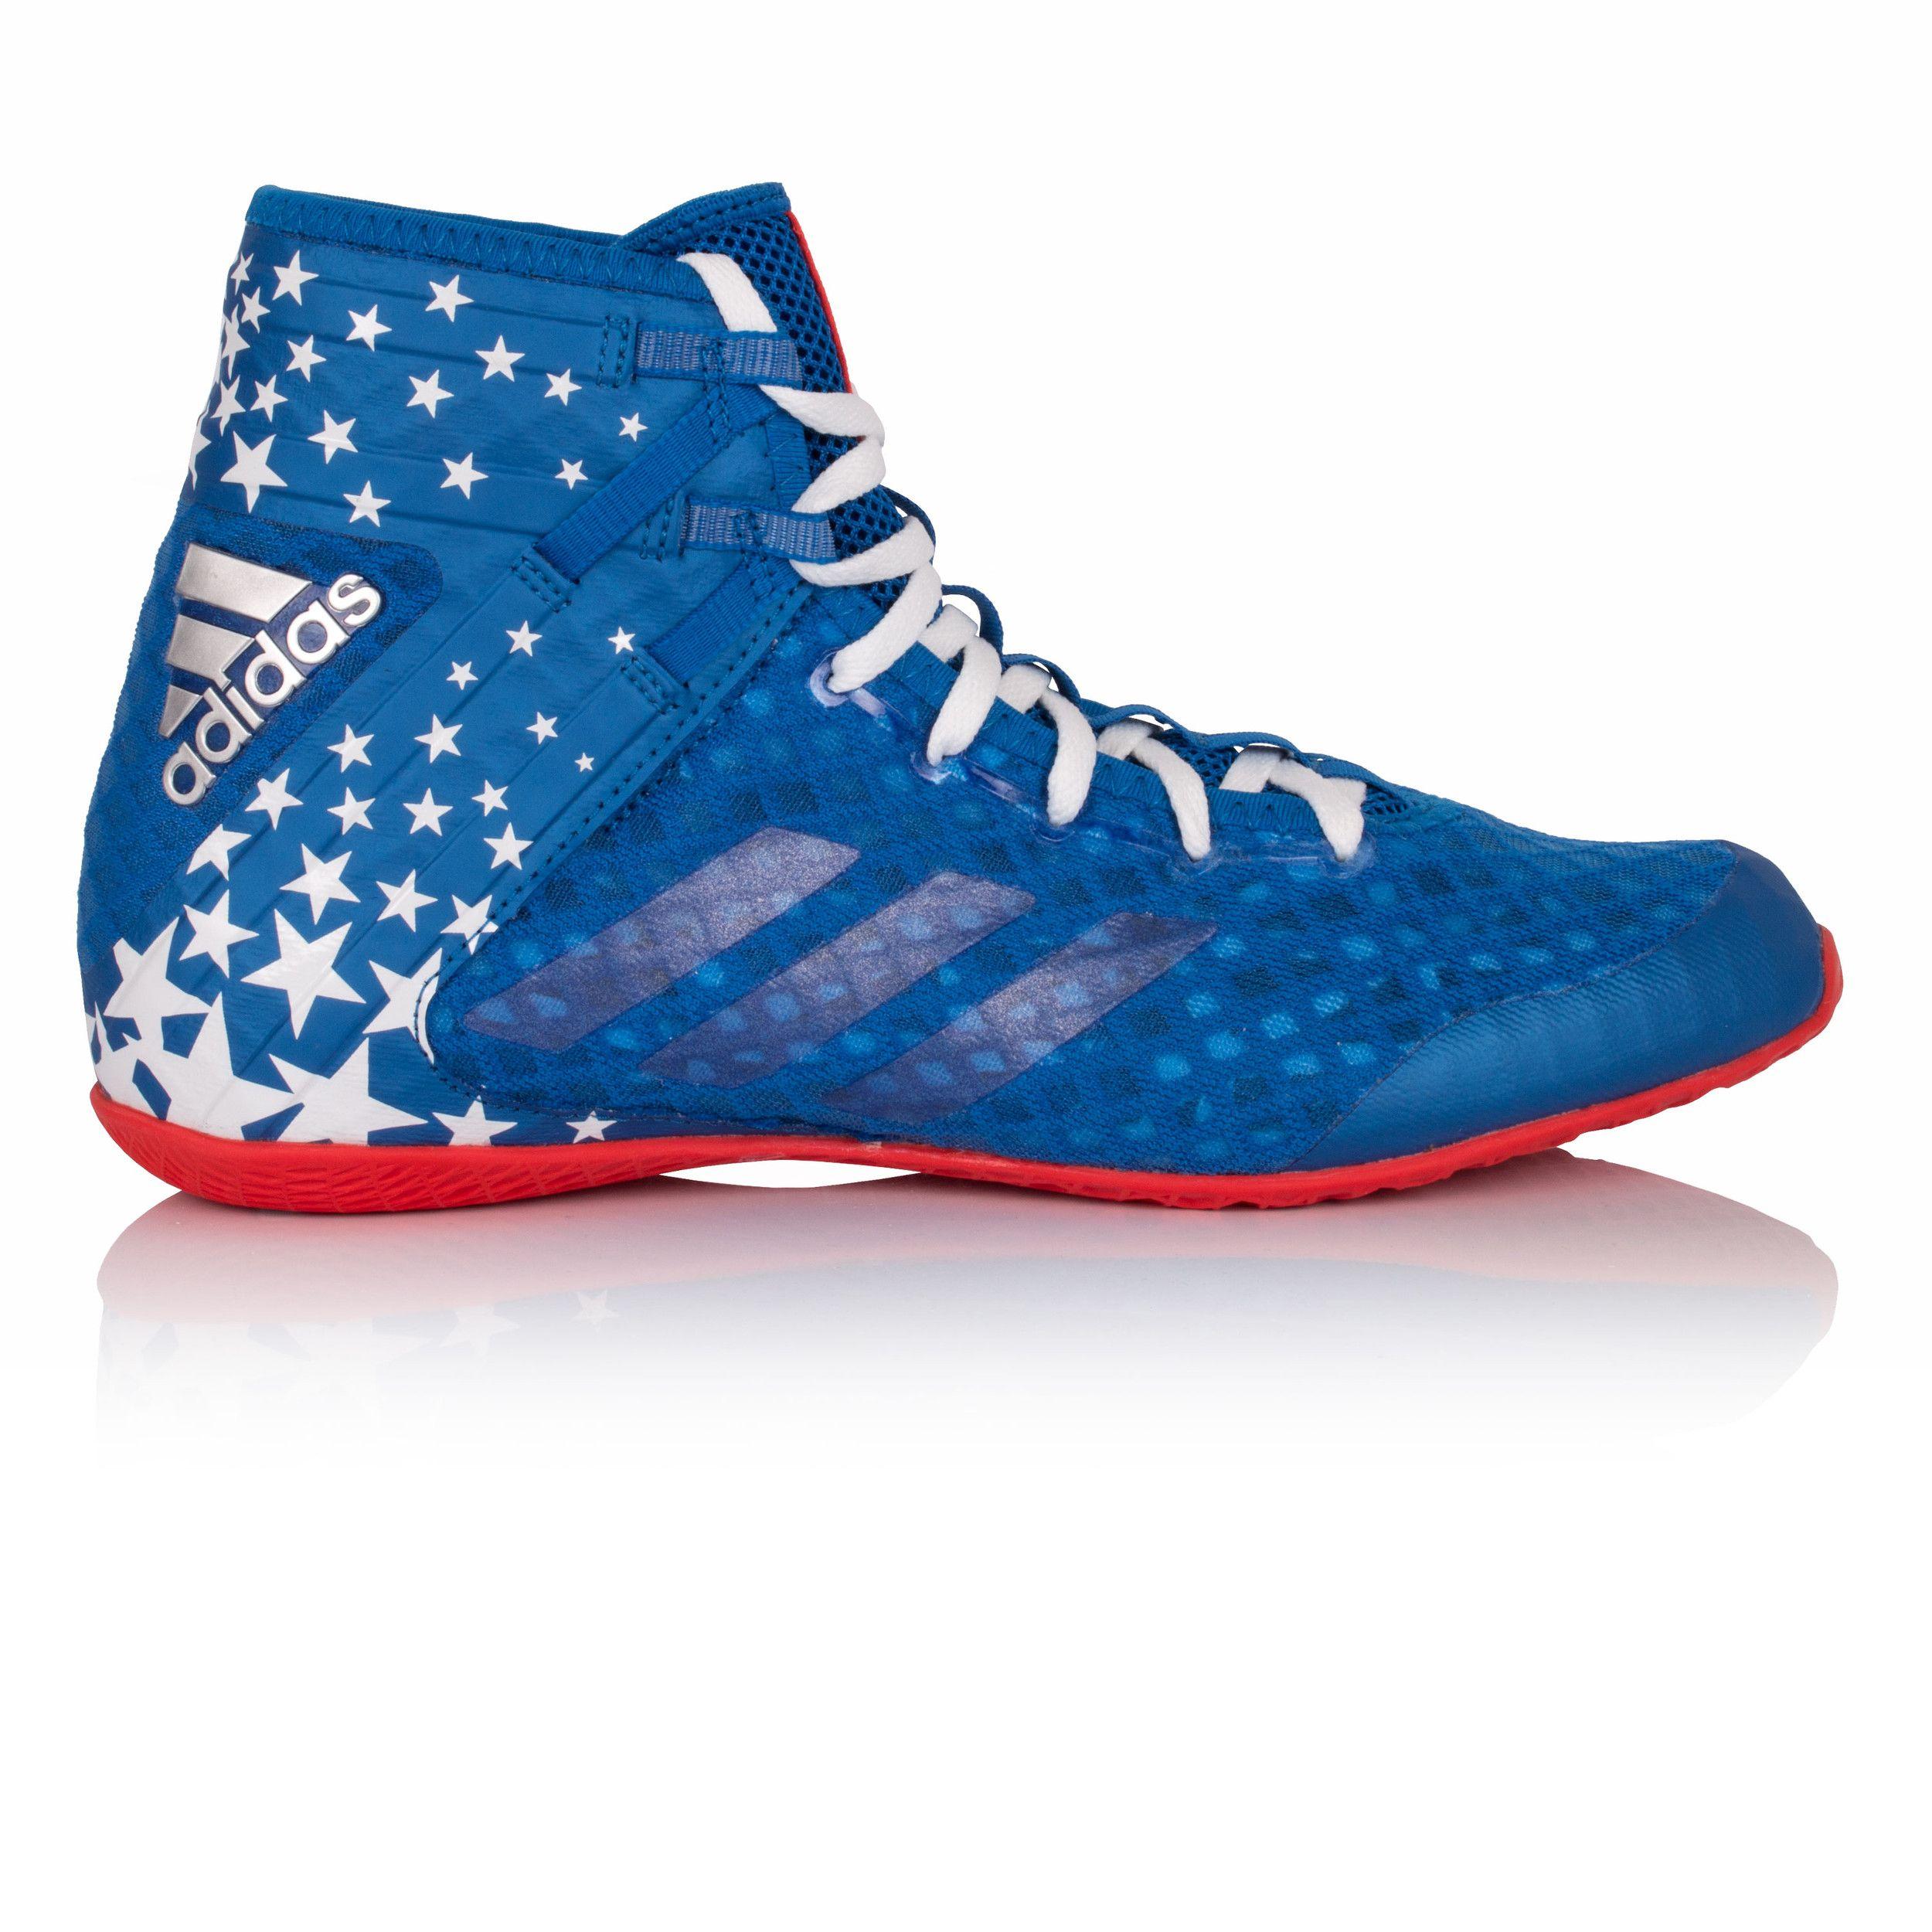 Red and Blue Shoes Logo - Adidas Speedex 16.1 LTD Mens Red Blue Boxing Training Shoes Boots